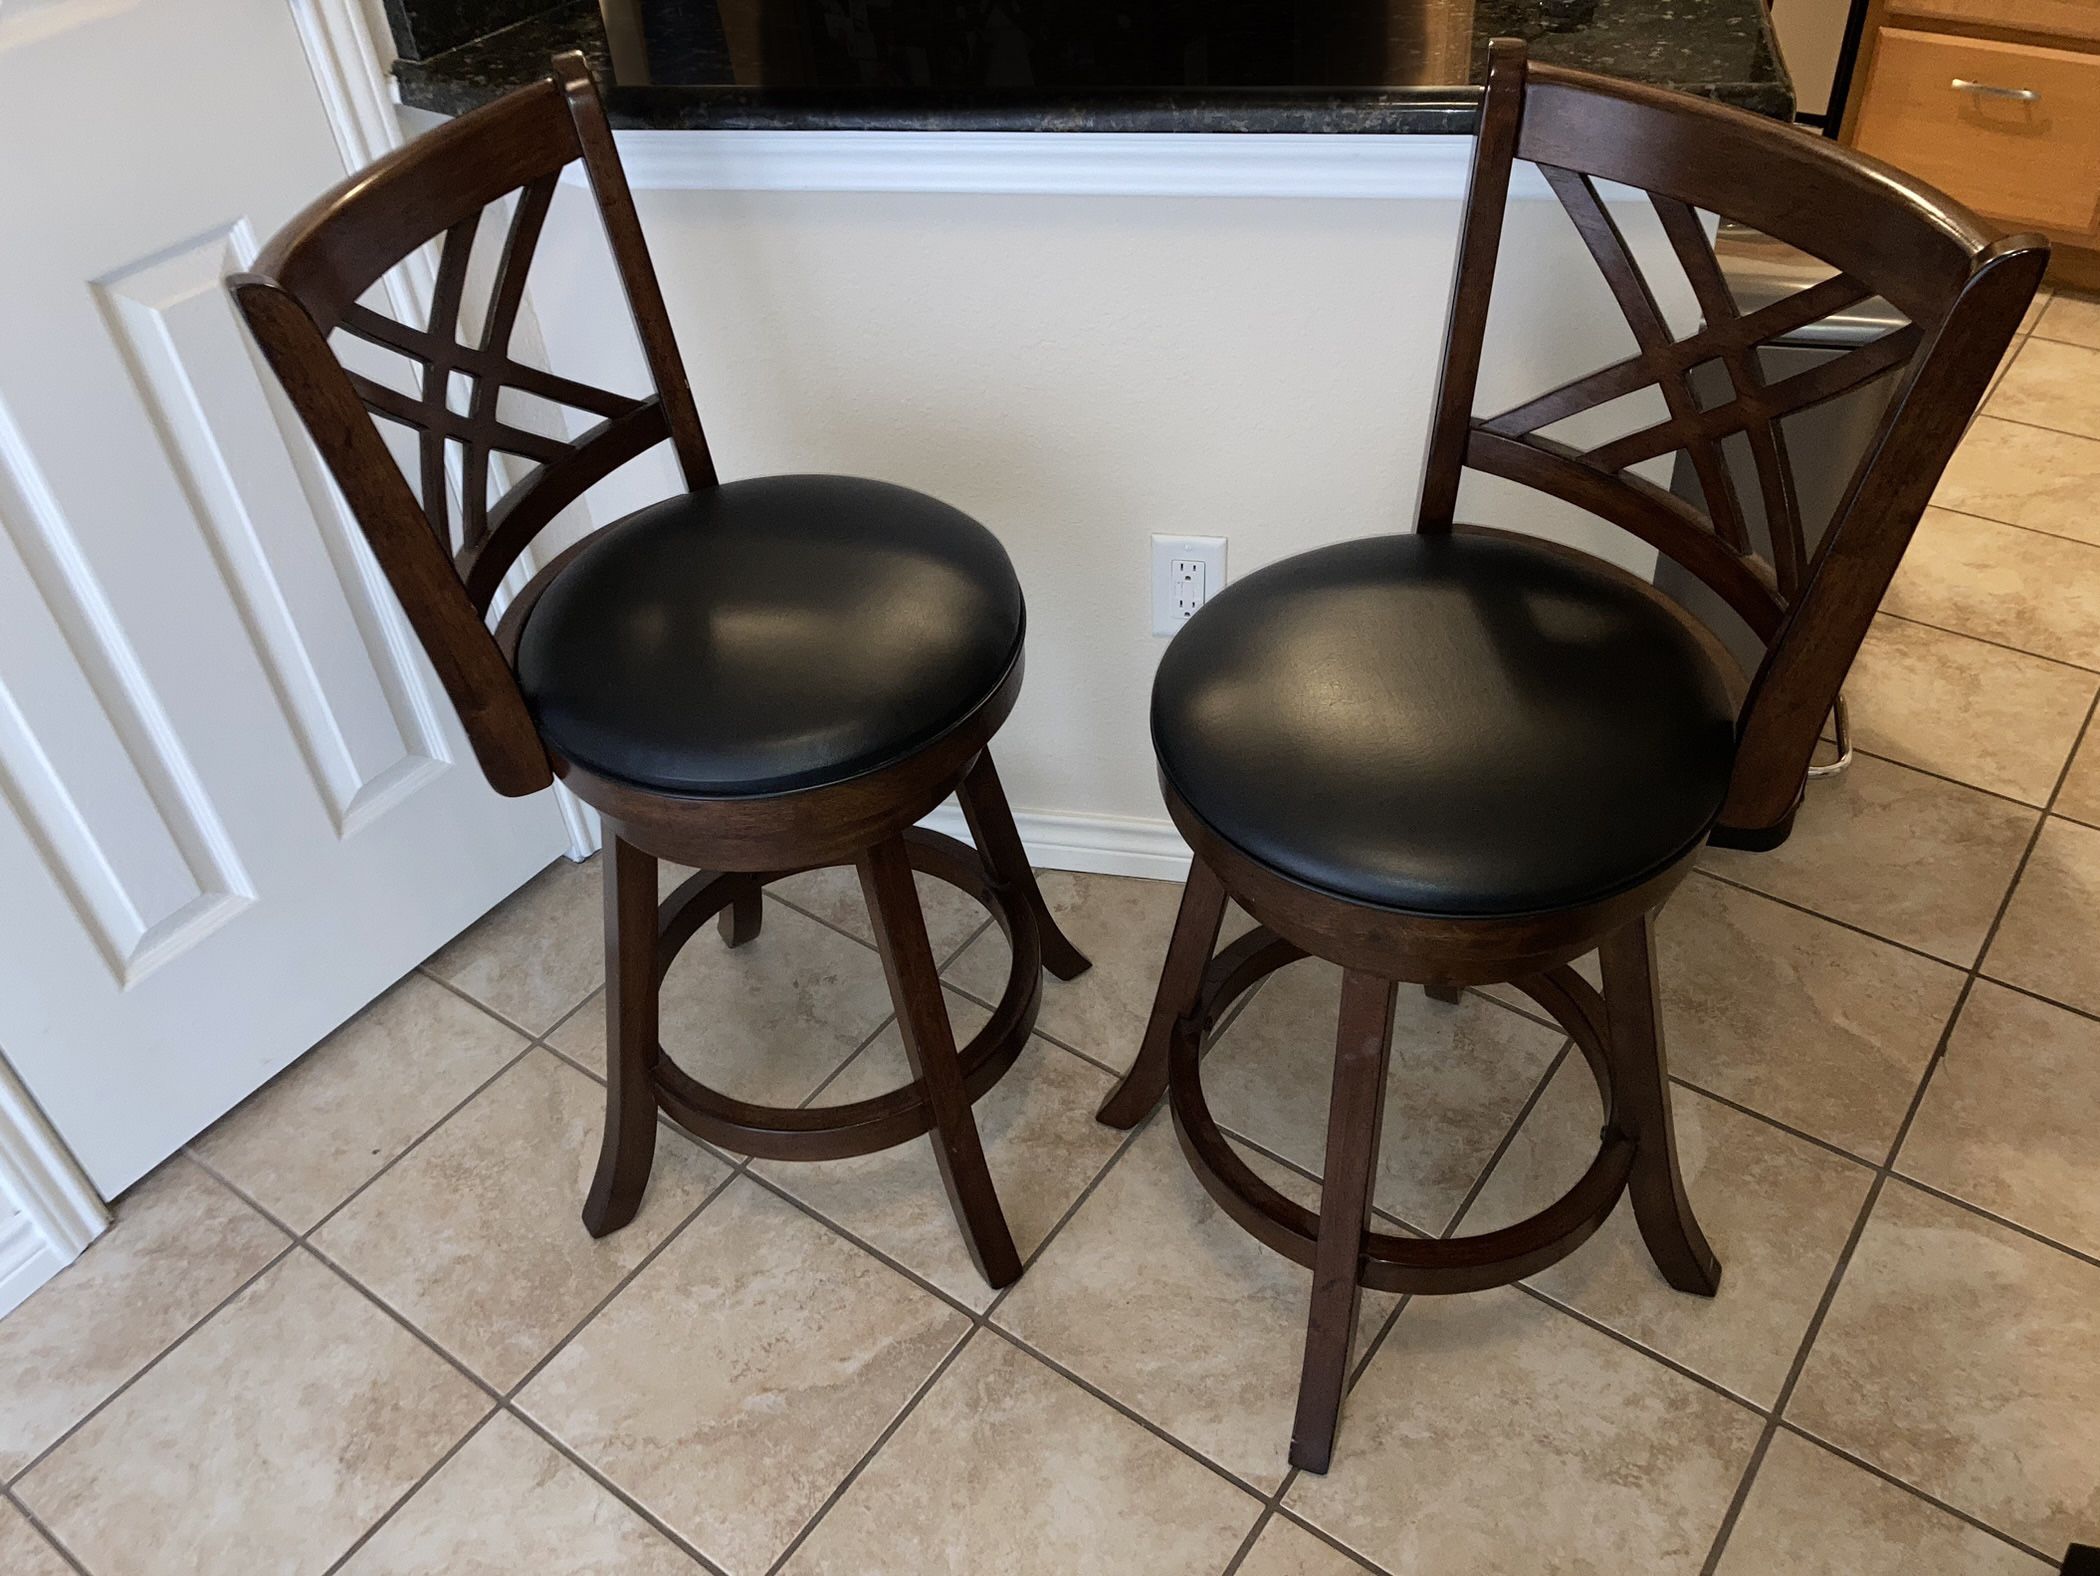 Swivel Bar Stool - Wood and black - Priced To Sell! Originally $200 Each